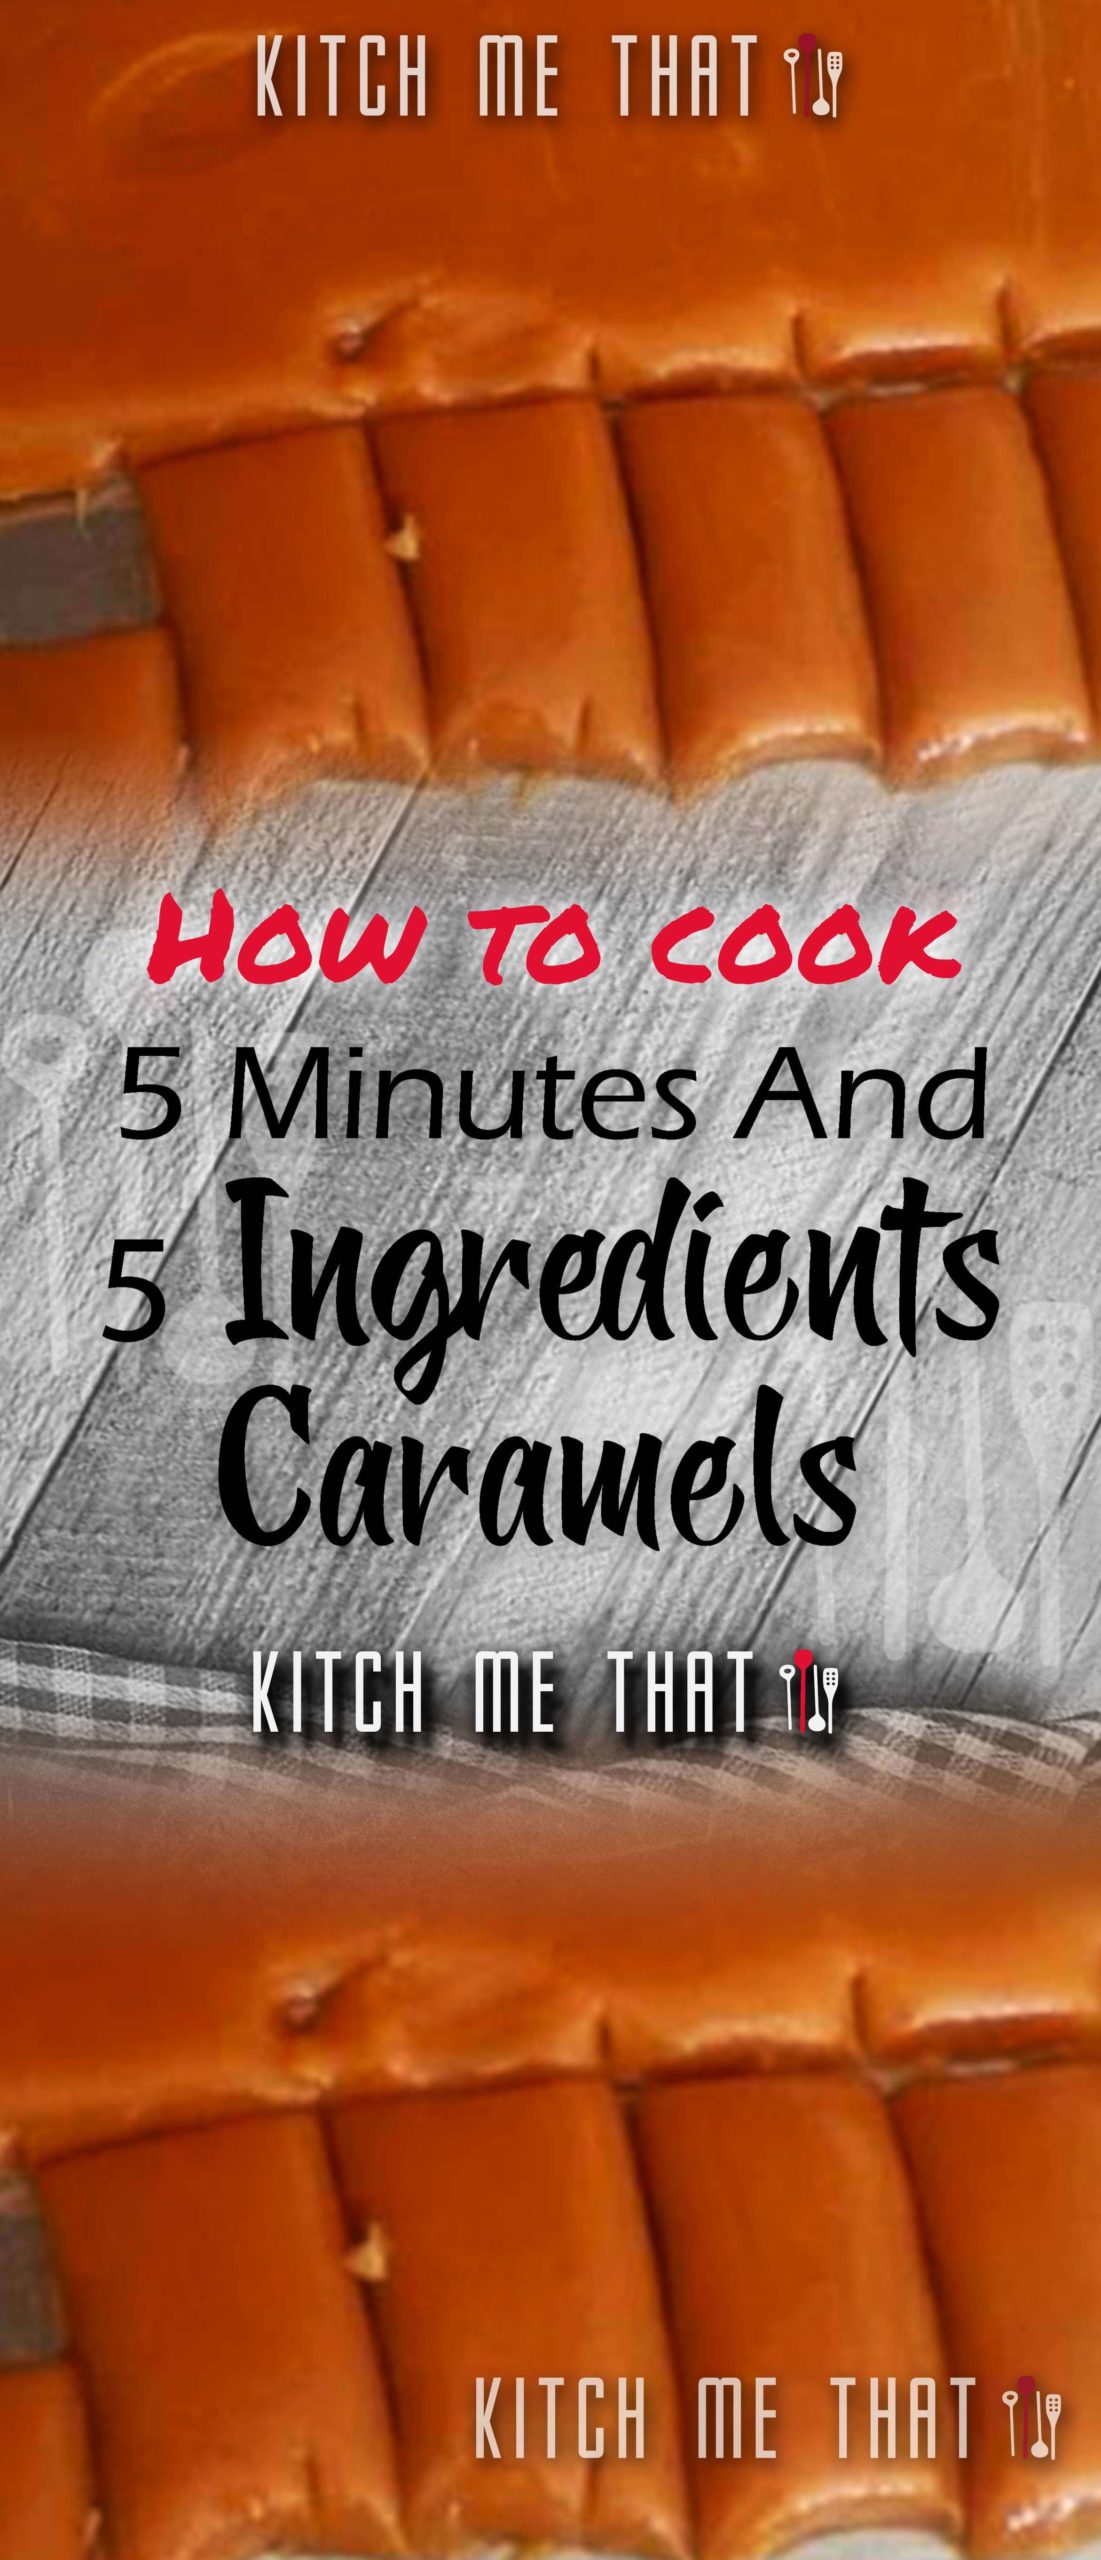 5 Minutes And 5 Ingredients Caramels